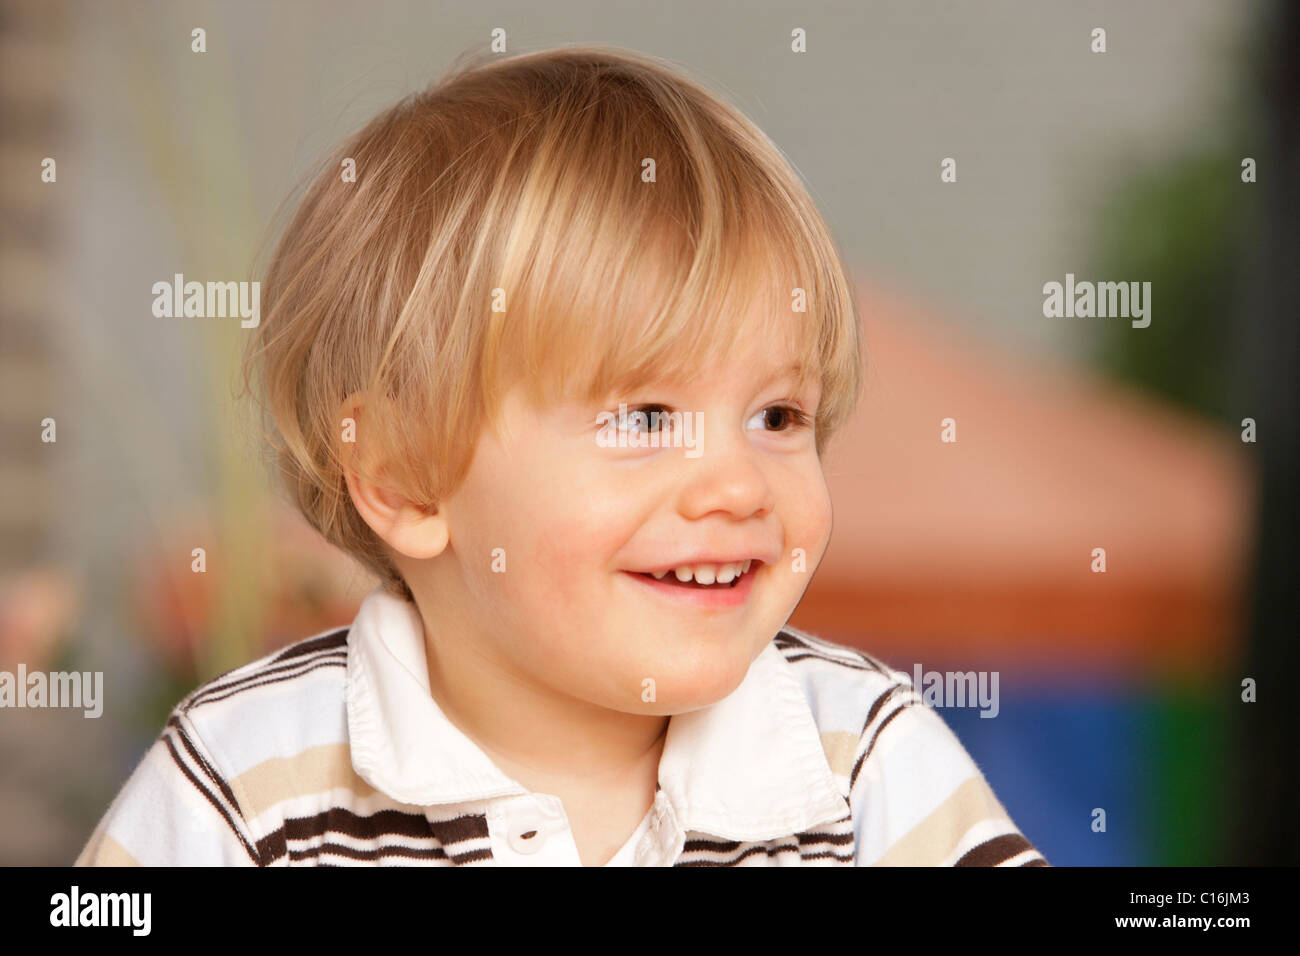 2 year old boy in polo shirt, laughing Stock Photo